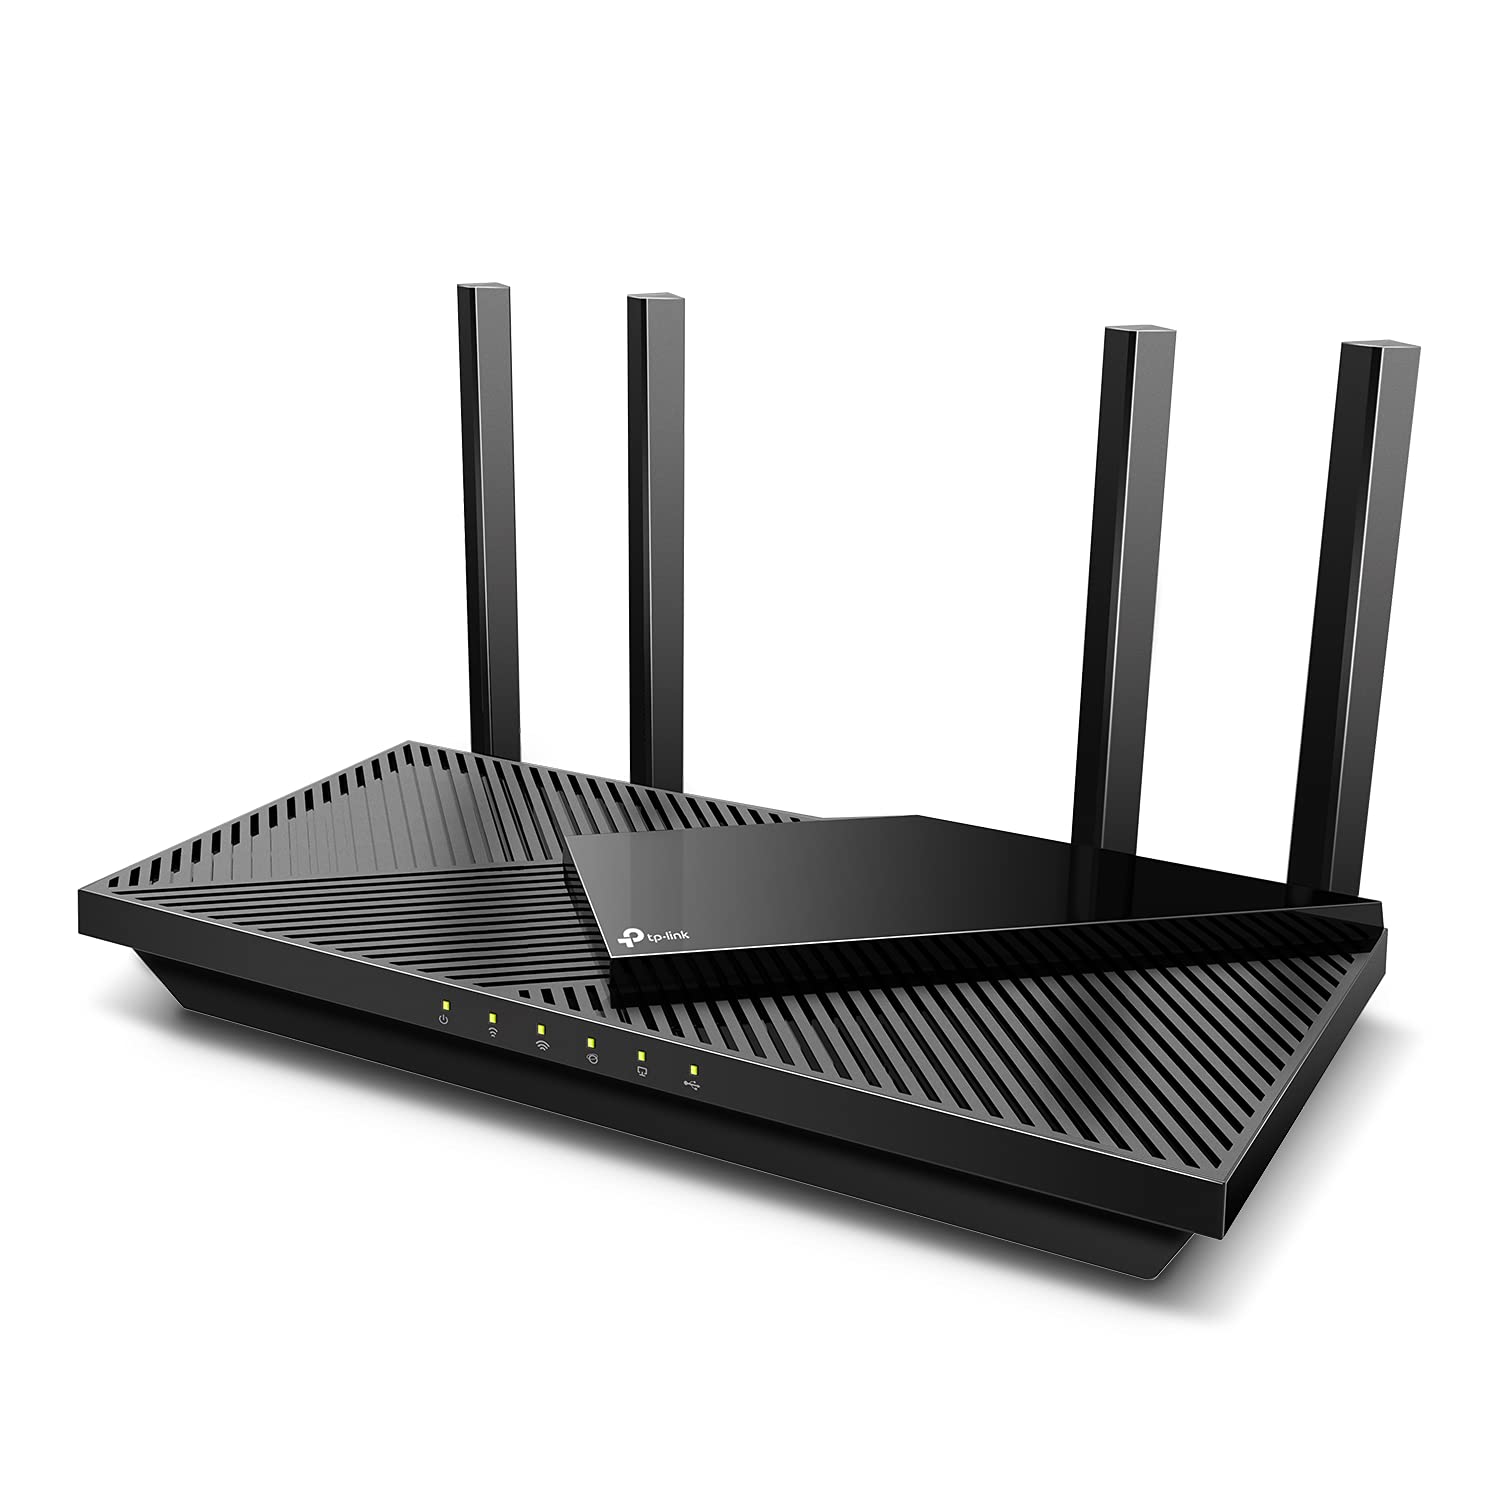 TP-Link AX3000 WiFi 6 Router – 802.11ax Wireless, Gigabit, Dual Band Internet, VPN Router, OneMesh Compatible (Archer AX55) $107.99